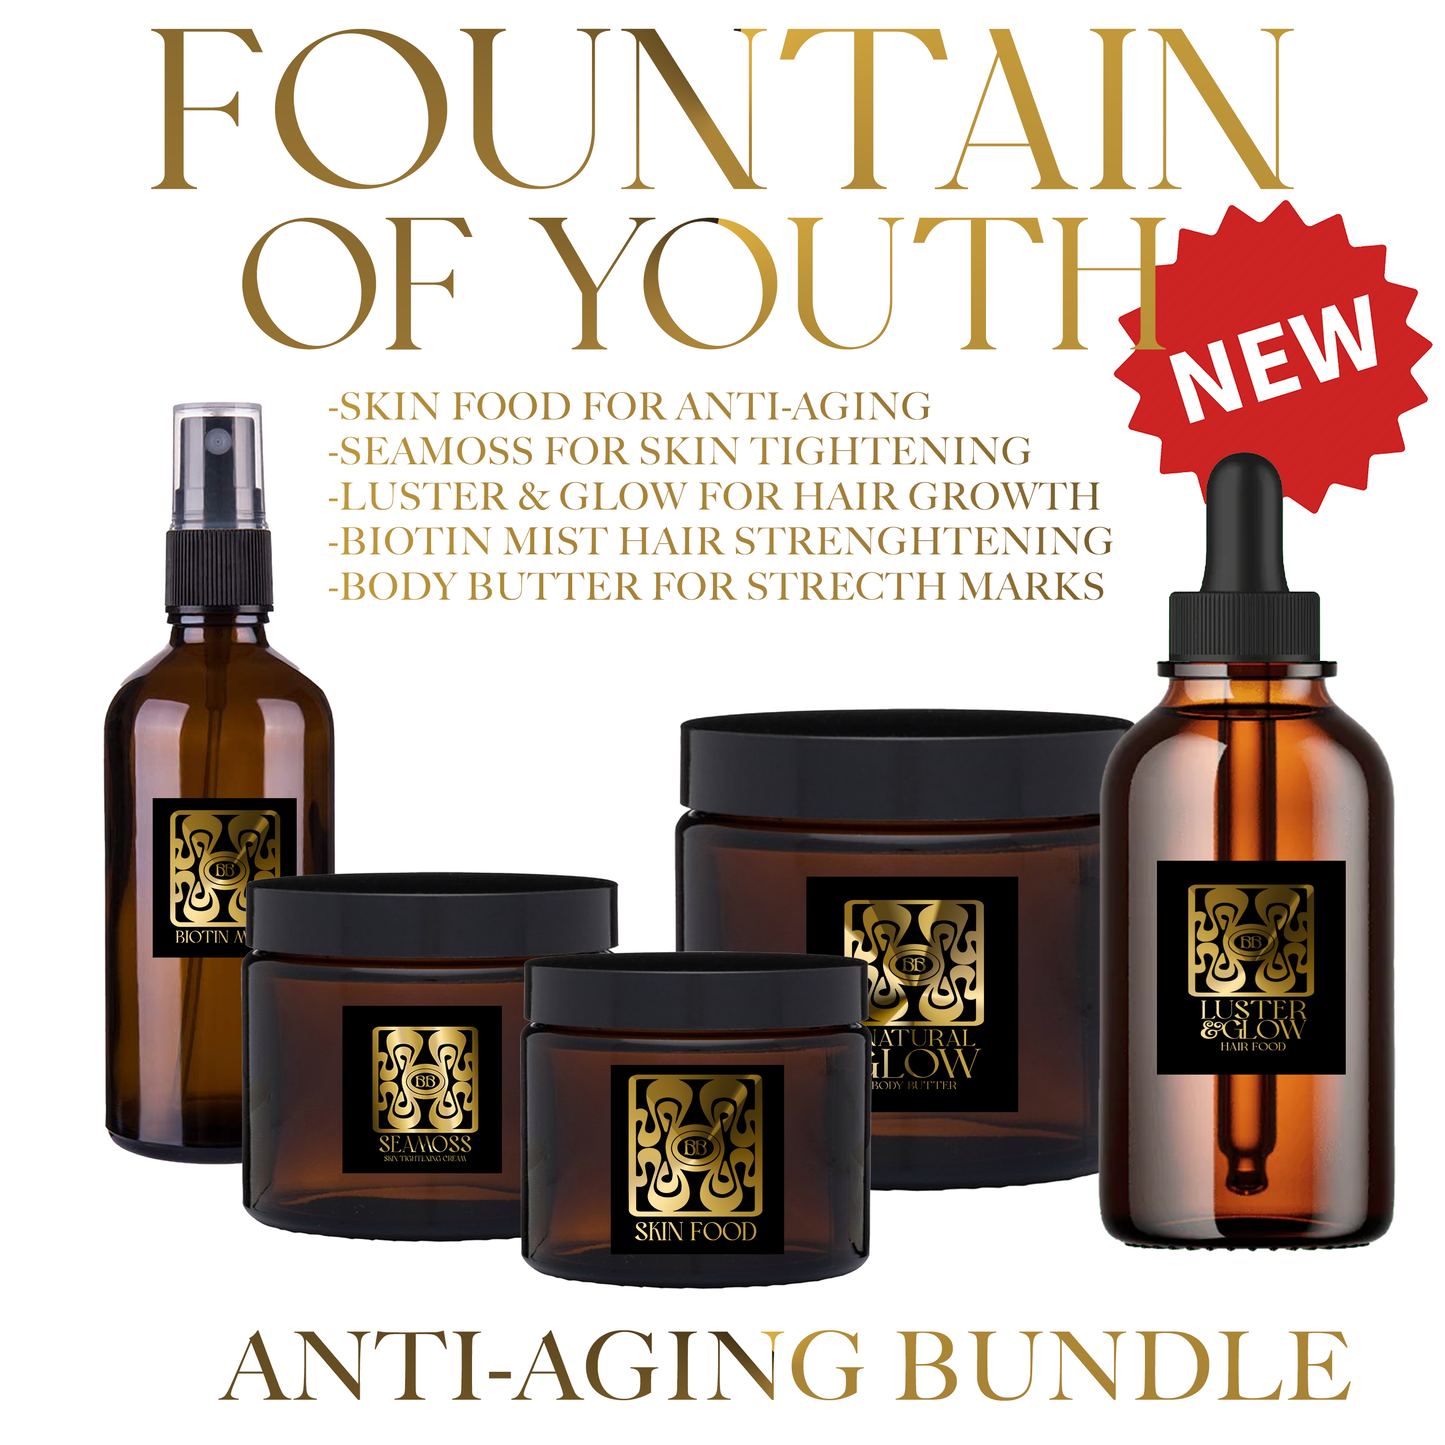 FOUNTAIN OF YOUTH BUNDLE